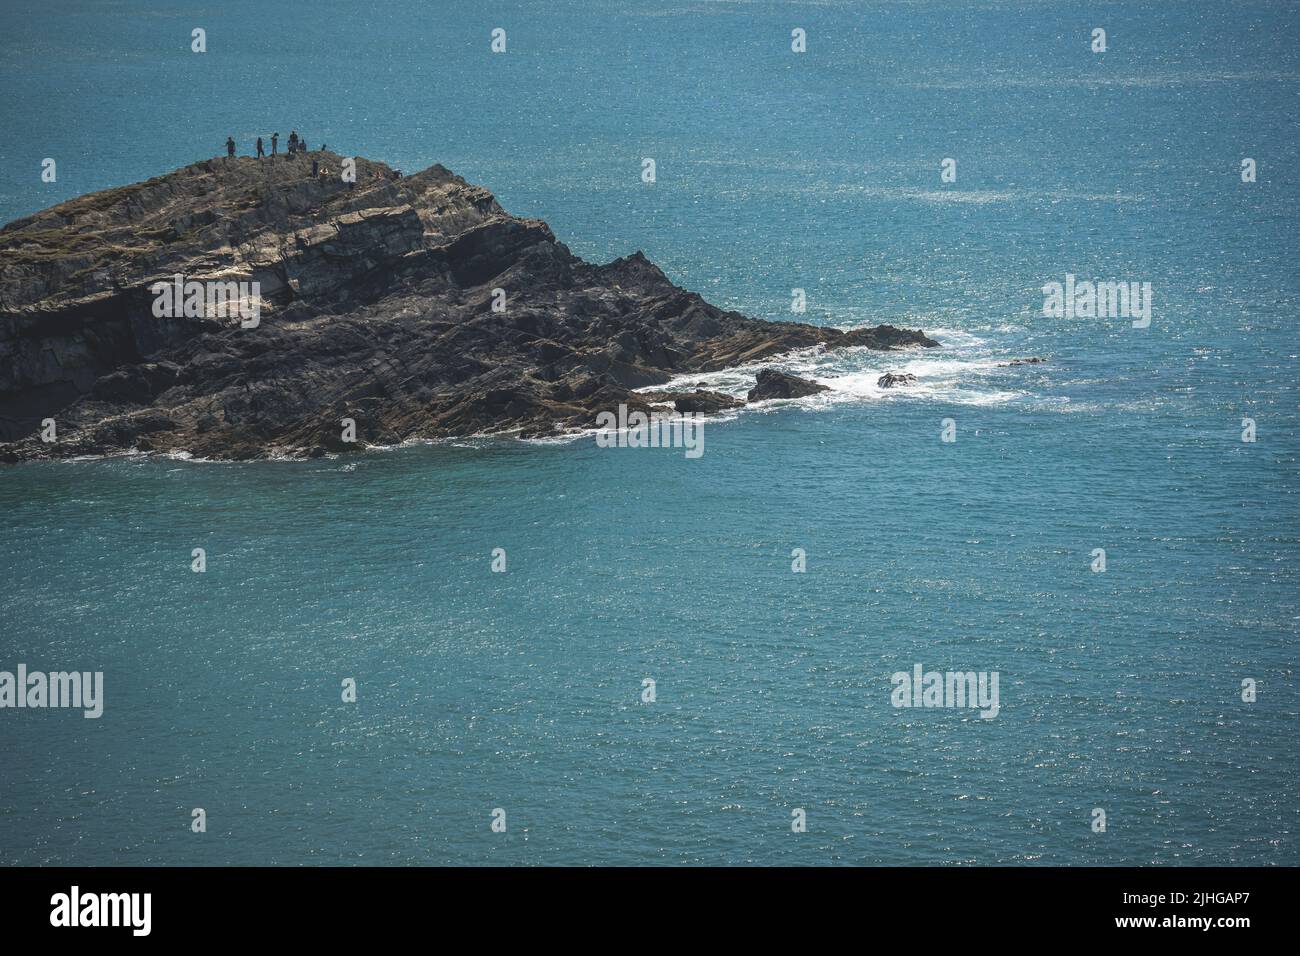 Tenby, Wales - May 2021 : People standing on top of a huge rocky outcrop enjoying hot summer day on The Whitesands Bay beach and cliffs Stock Photo